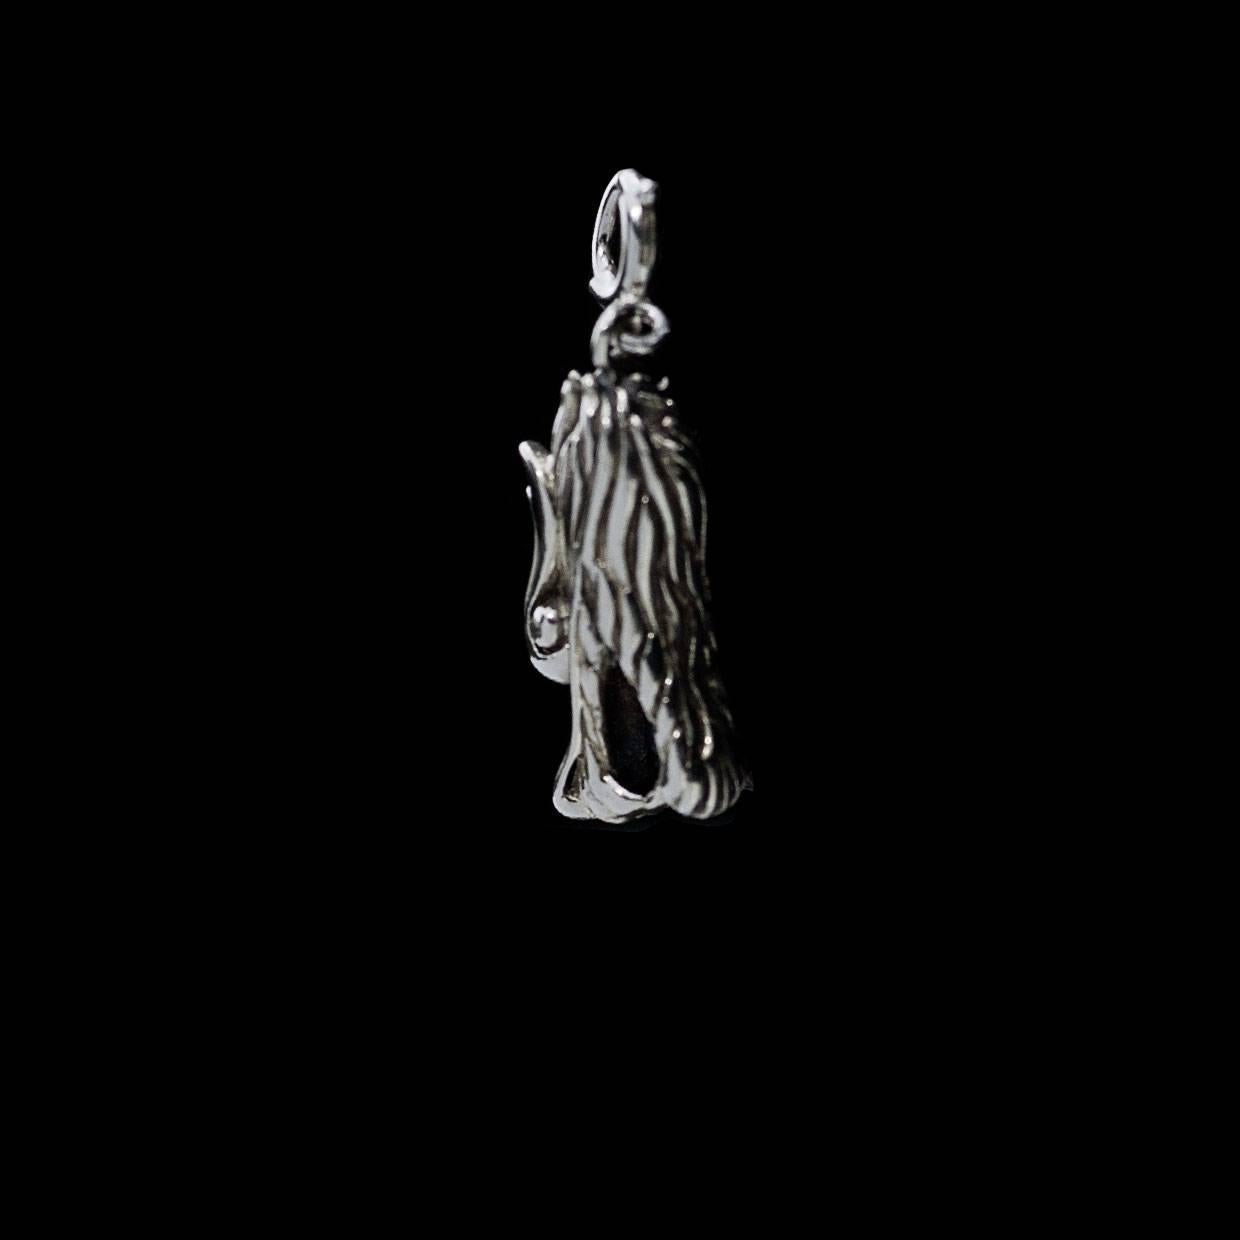 Each piece of John Hardy jewelry has been crafted in Bali since 1975. John Hardy is dedicated to creating timeless one-of-a-kind pieces that are brilliantly alive.

This sterling silver charm/pendant is from John Hardy's signature Naga collection.